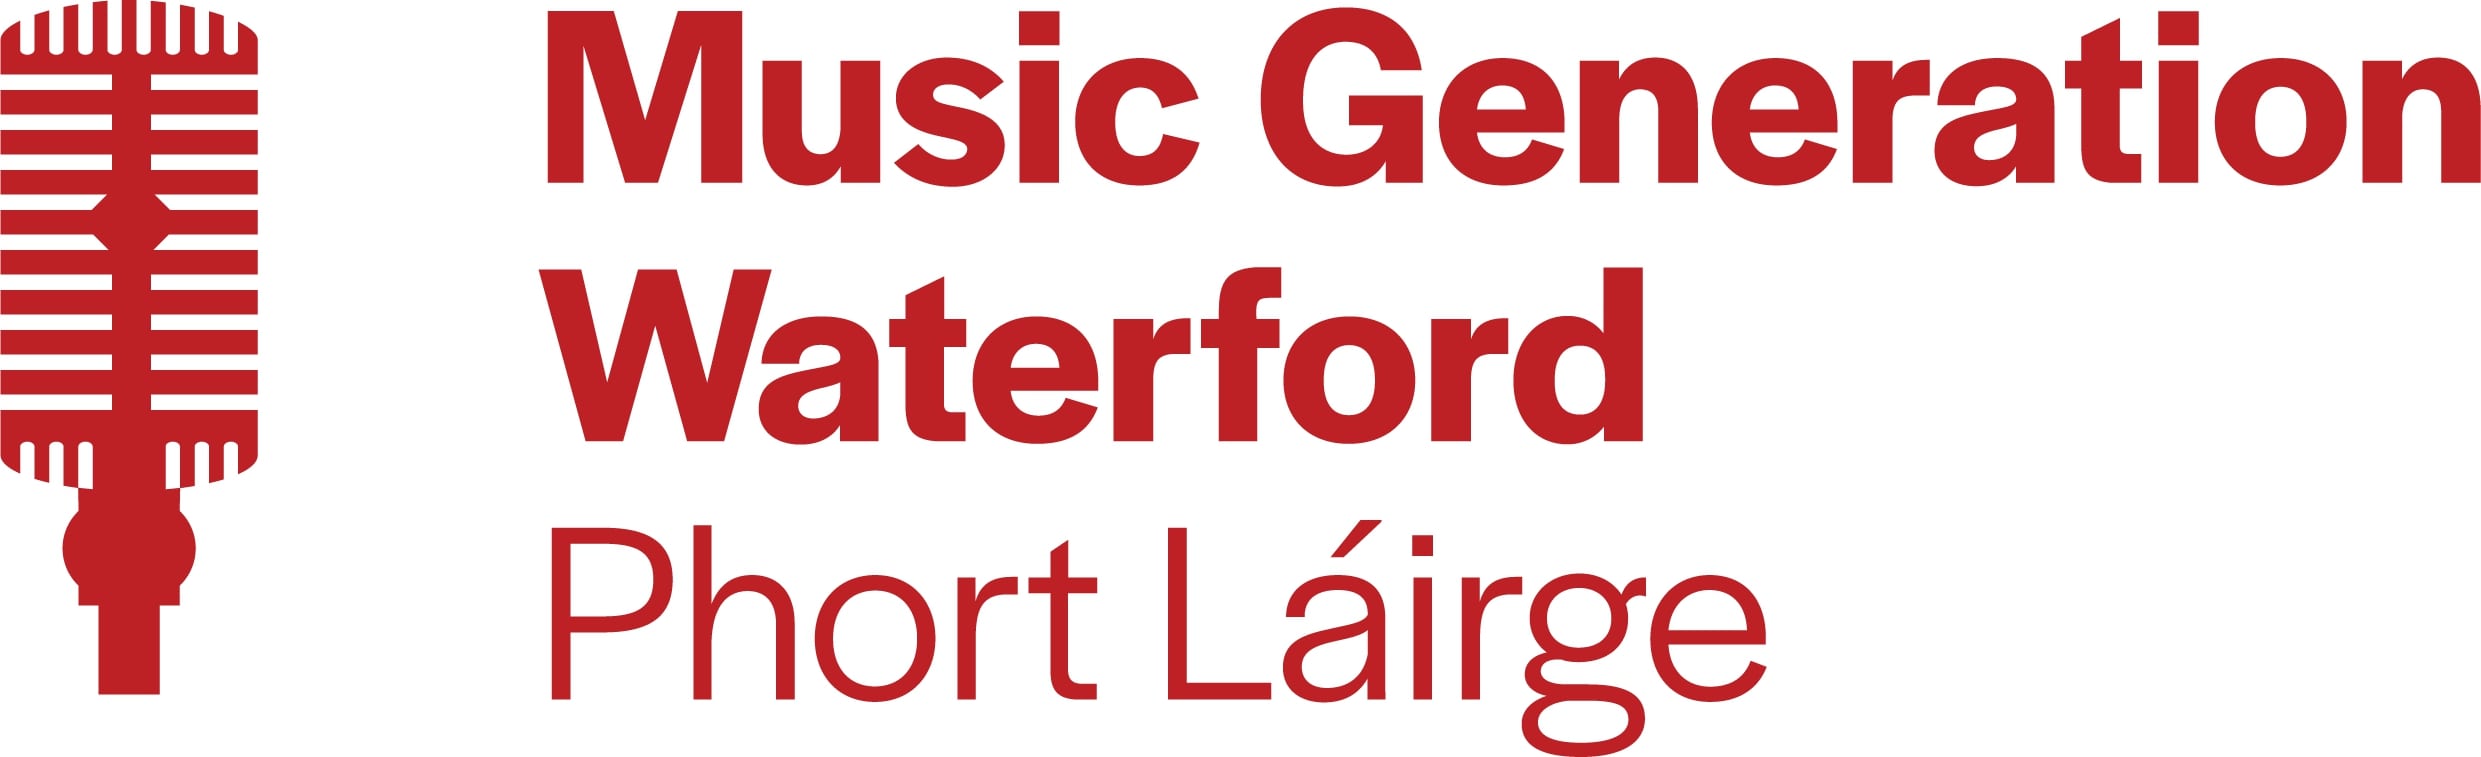 Music Generation Waterford